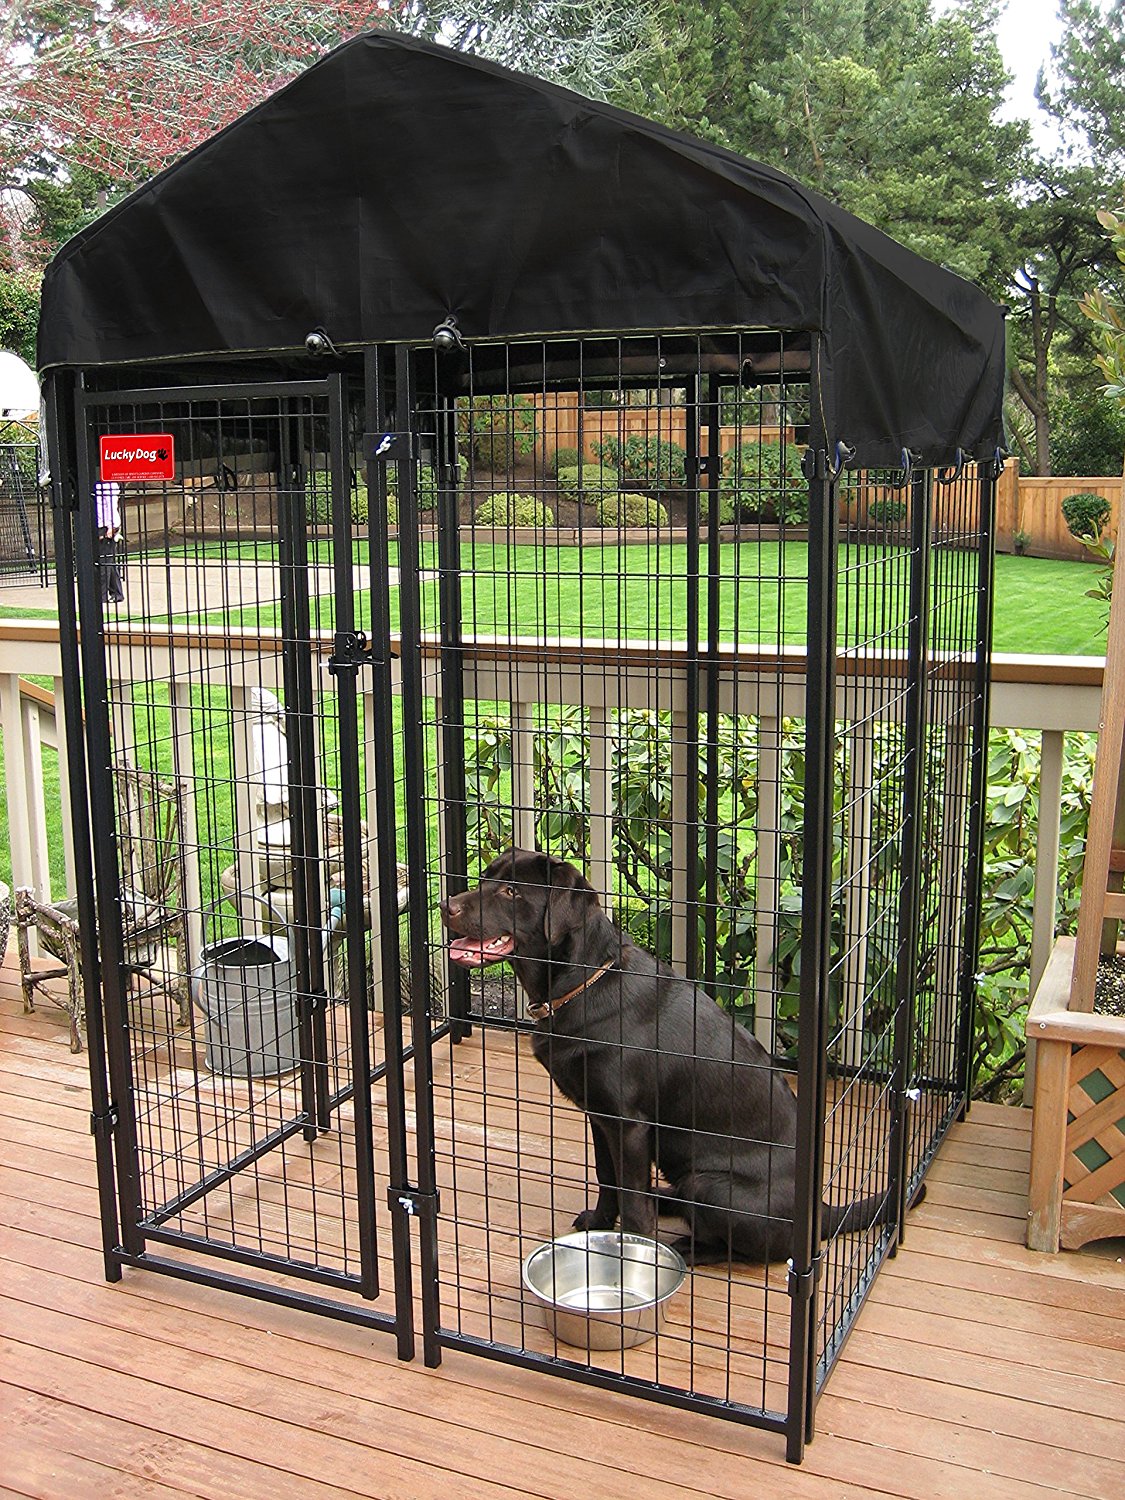 lucky-dog-heavy-duty-dog-cage-outdoor-pet-playpen-4-ft-x-4ft-x-6-ft